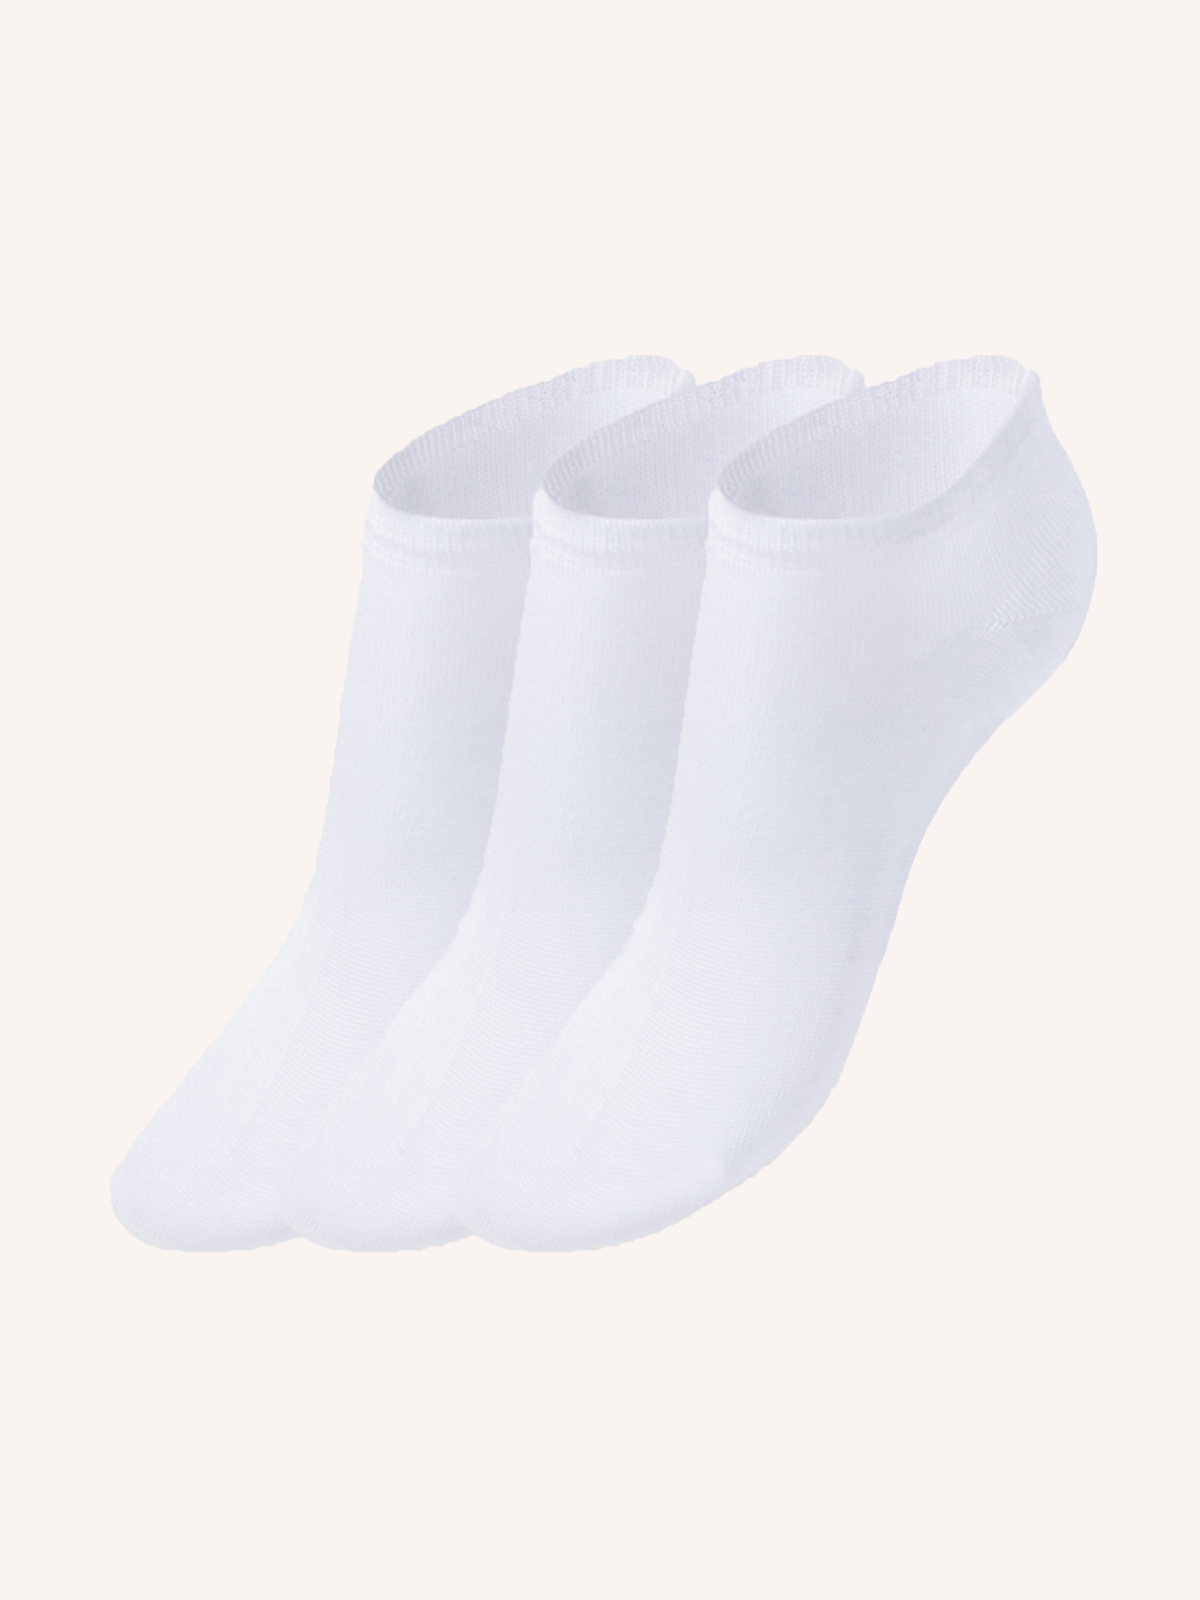 Short Sock in Organic Cotton for Women | Plain Color | Pack of 3 pairs | Bio D2